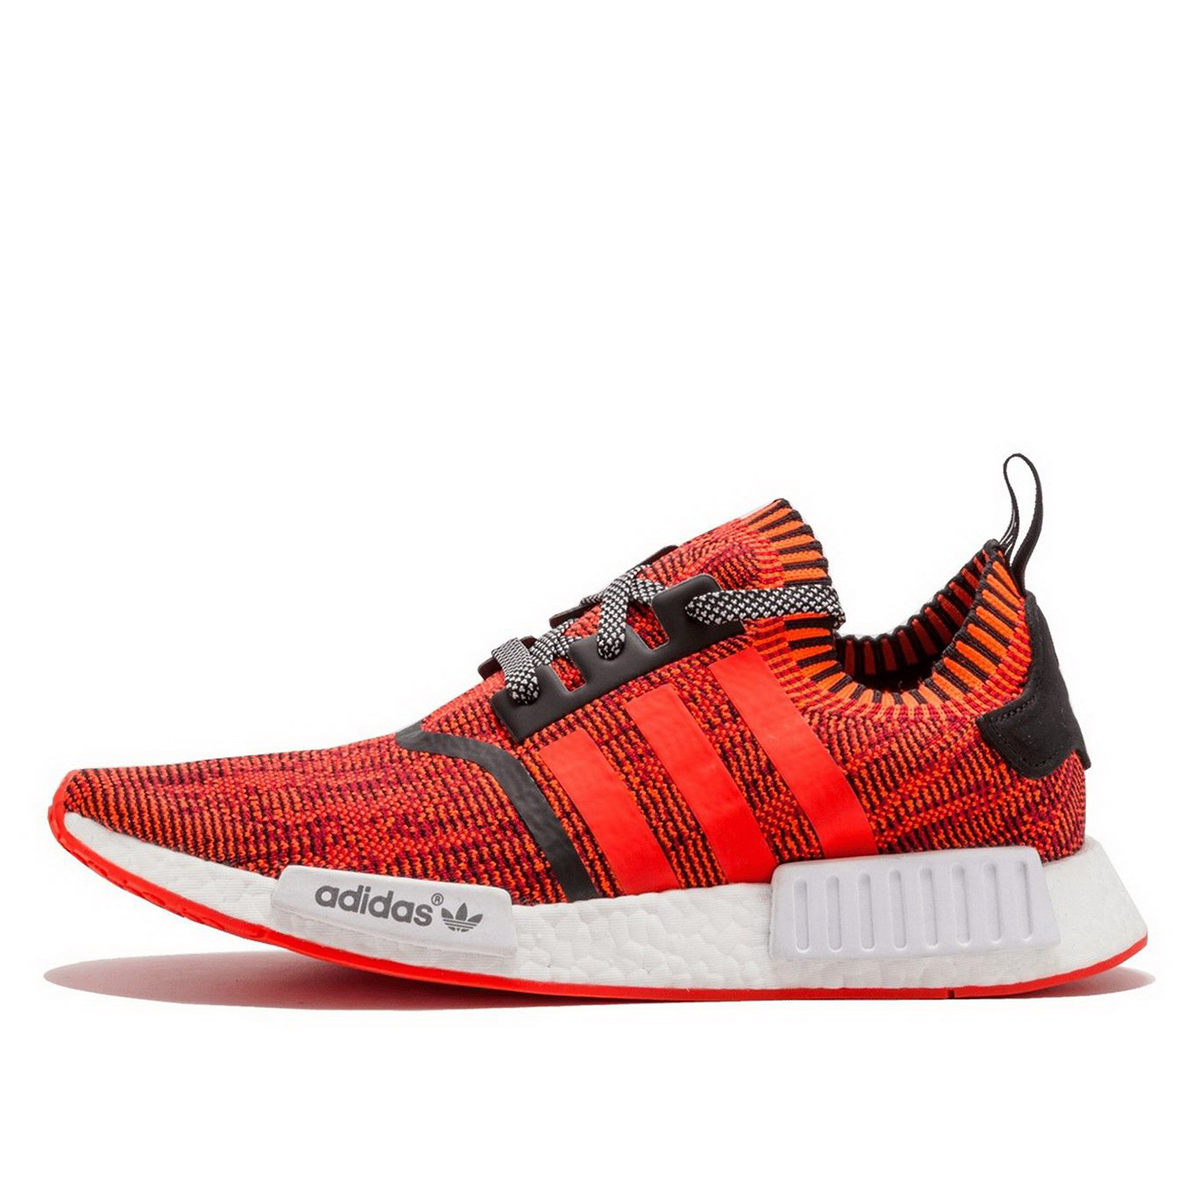 Adidas NMD R1 Red Apple | BY1905 - KLEKT